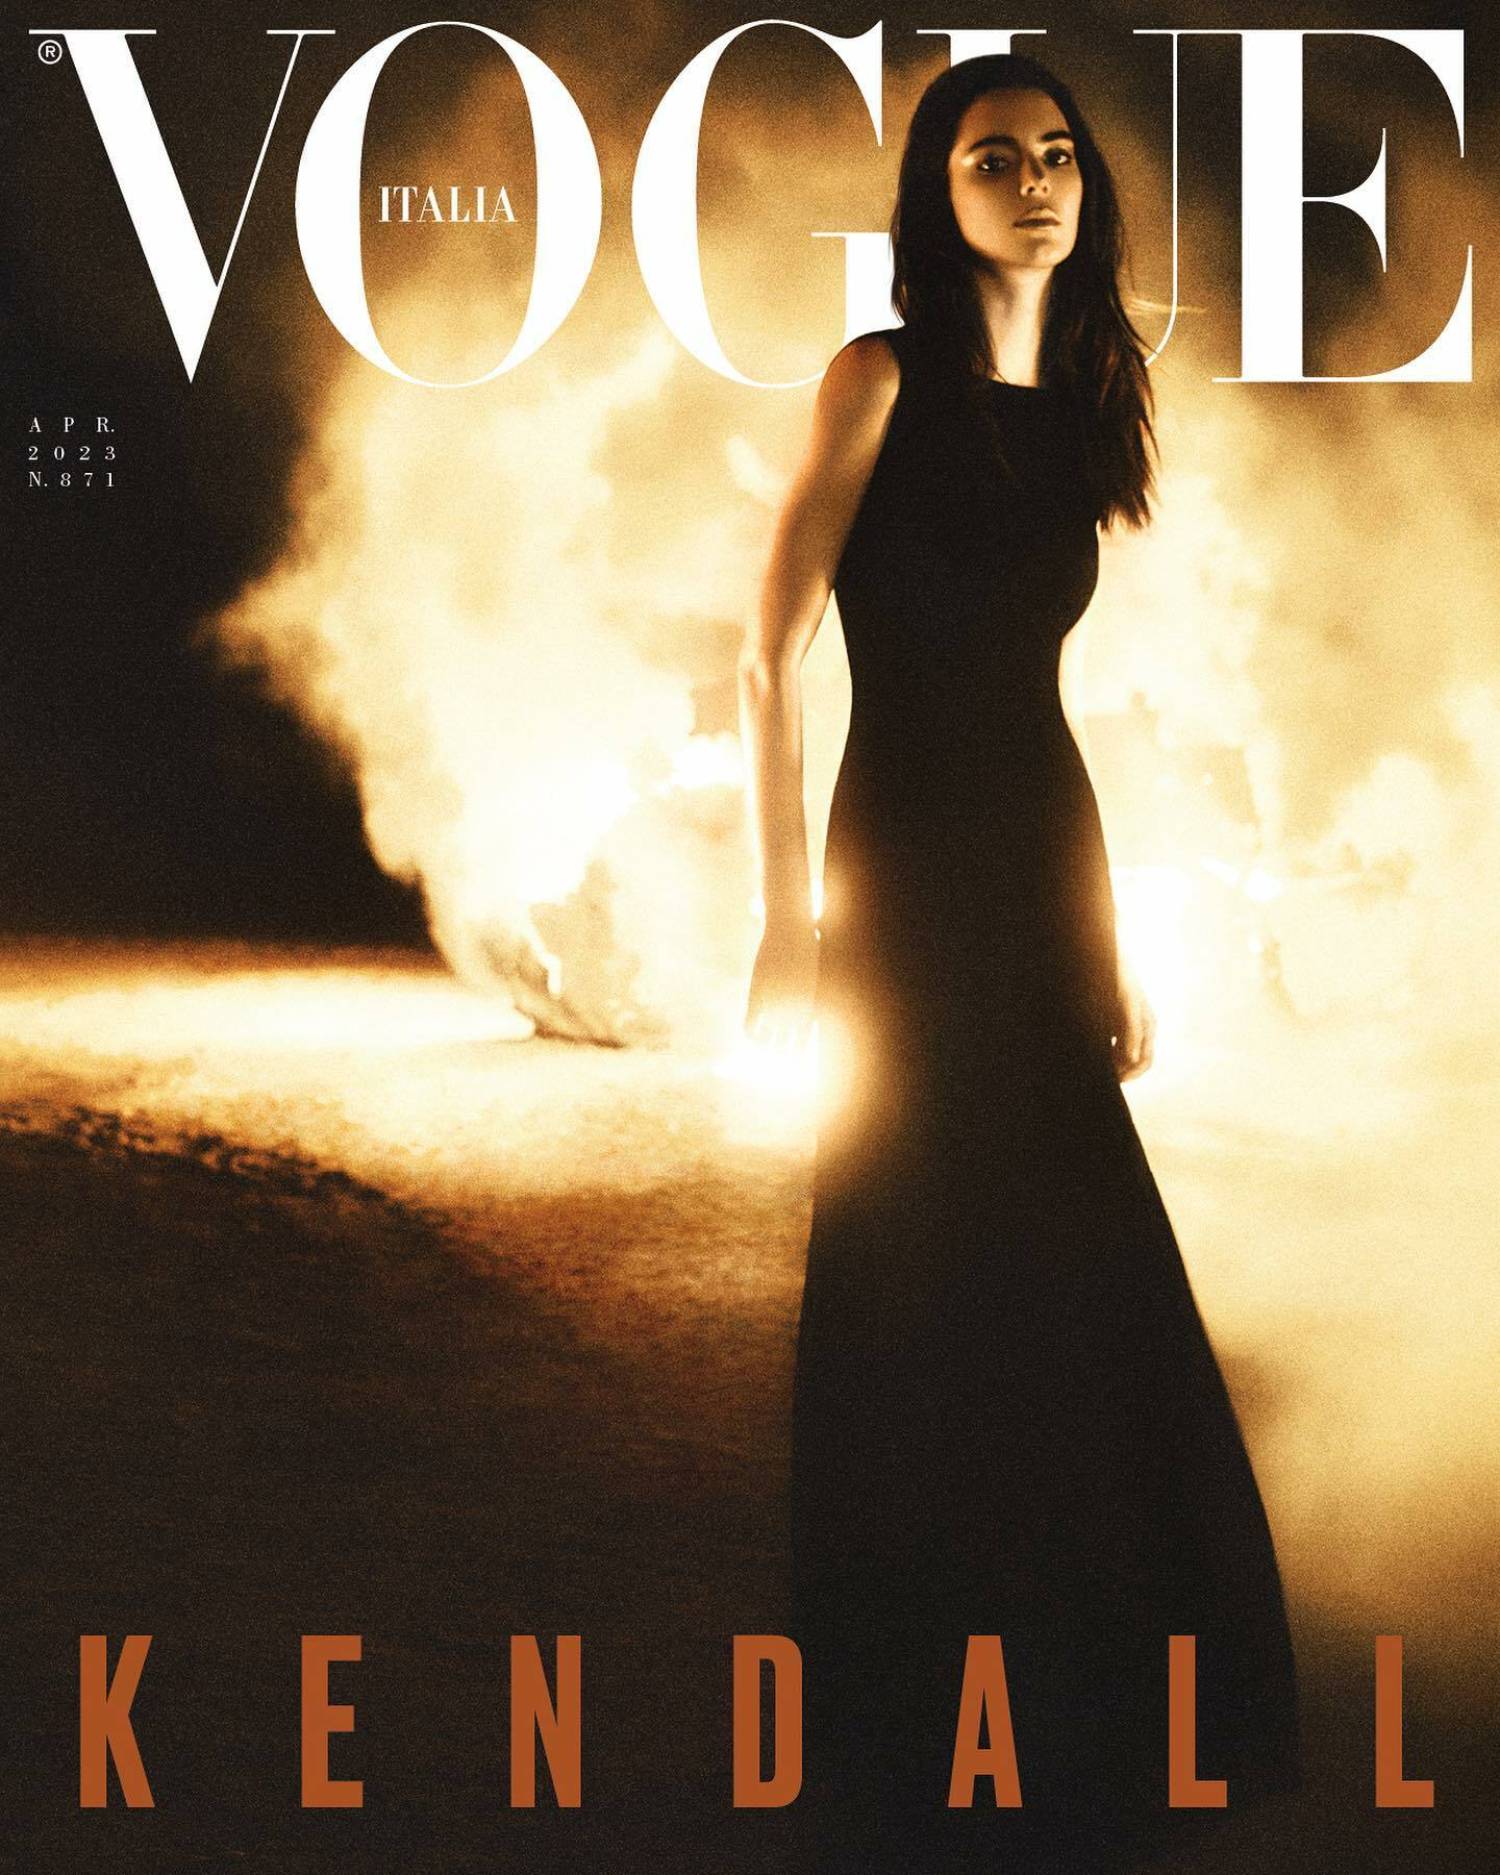 Kendall Jenner Covers Vogue Italia April 2023